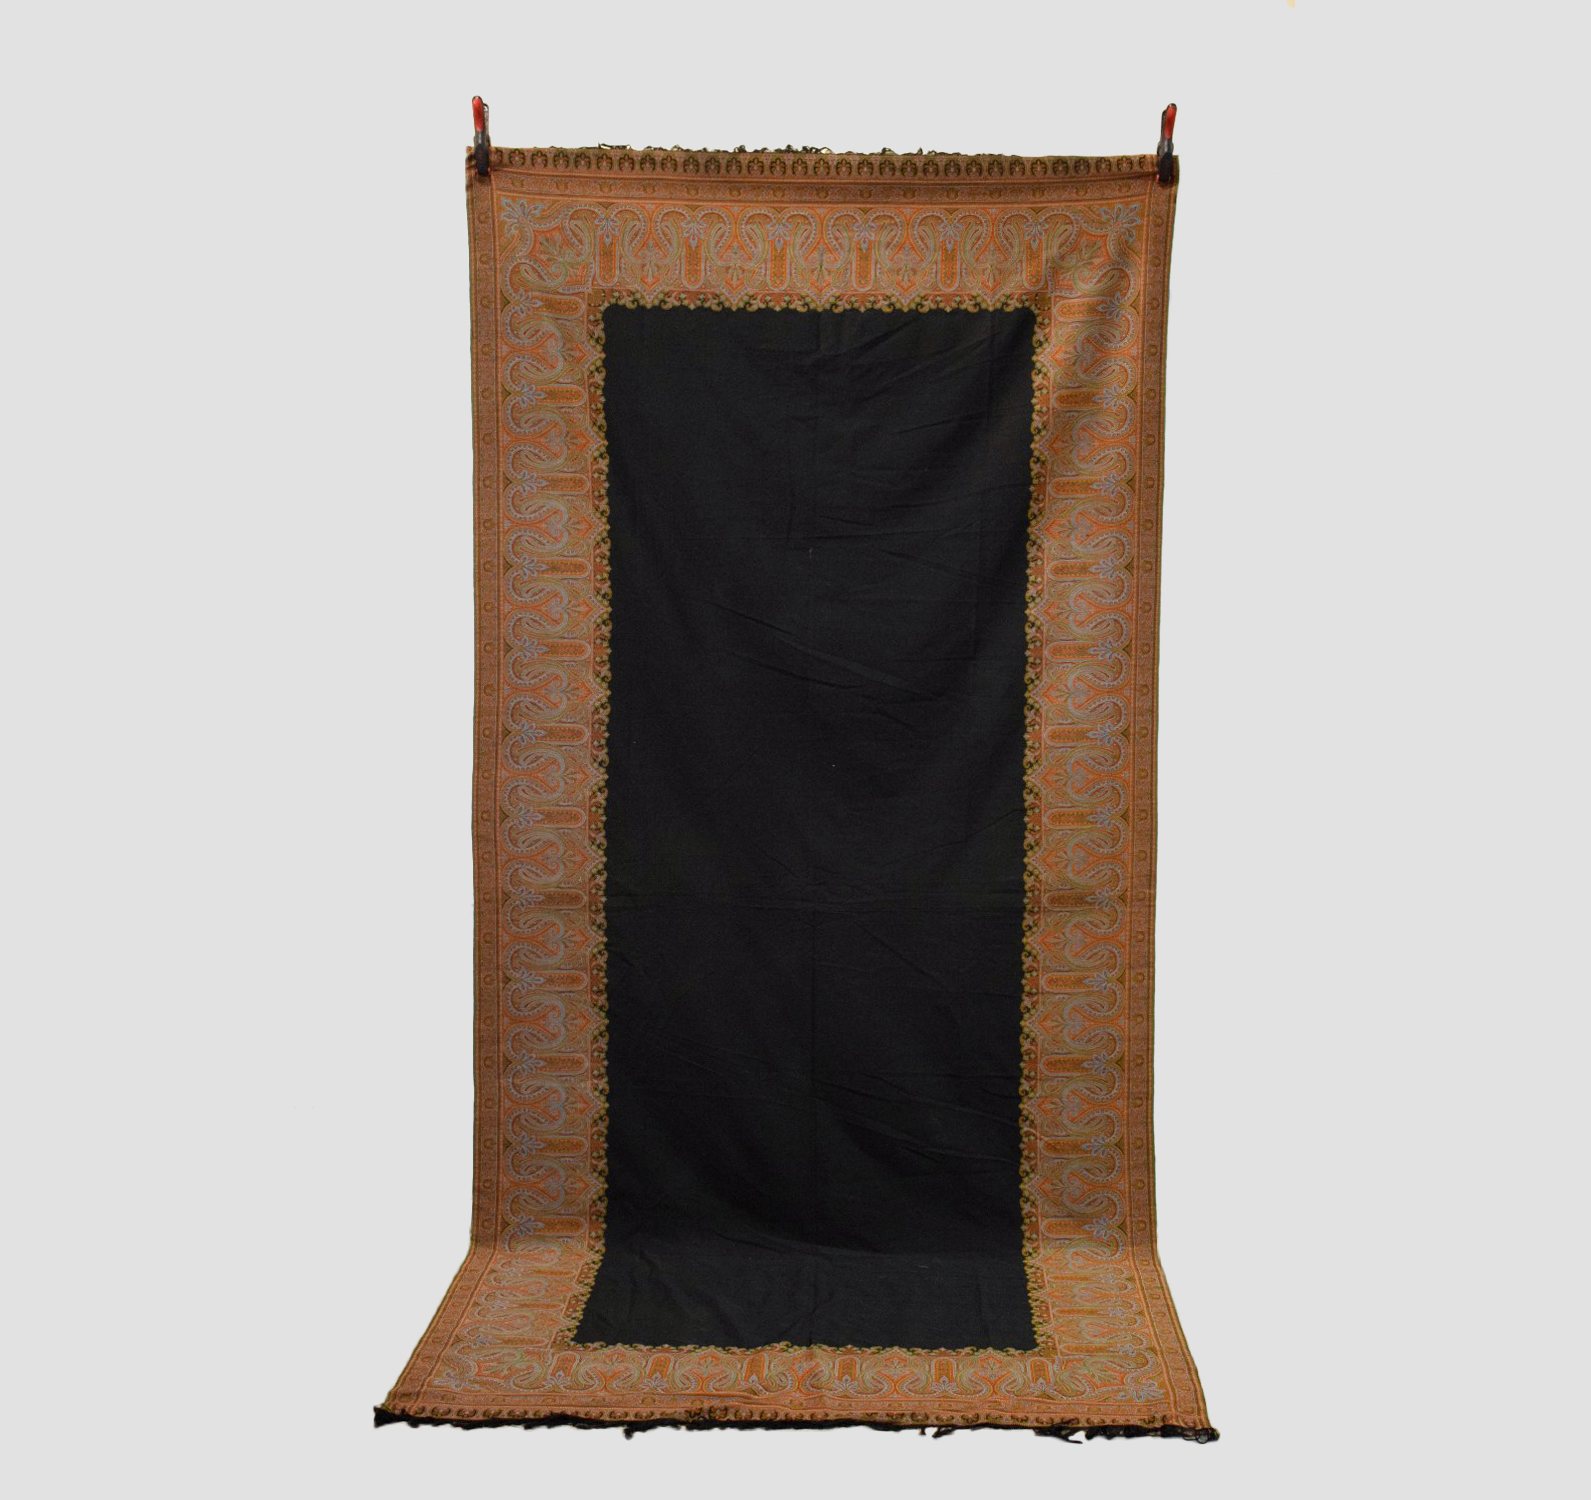 French long wool carriage shawl, late 19th century, 133in. X 62in. 338cm. X 158cm. Plain black